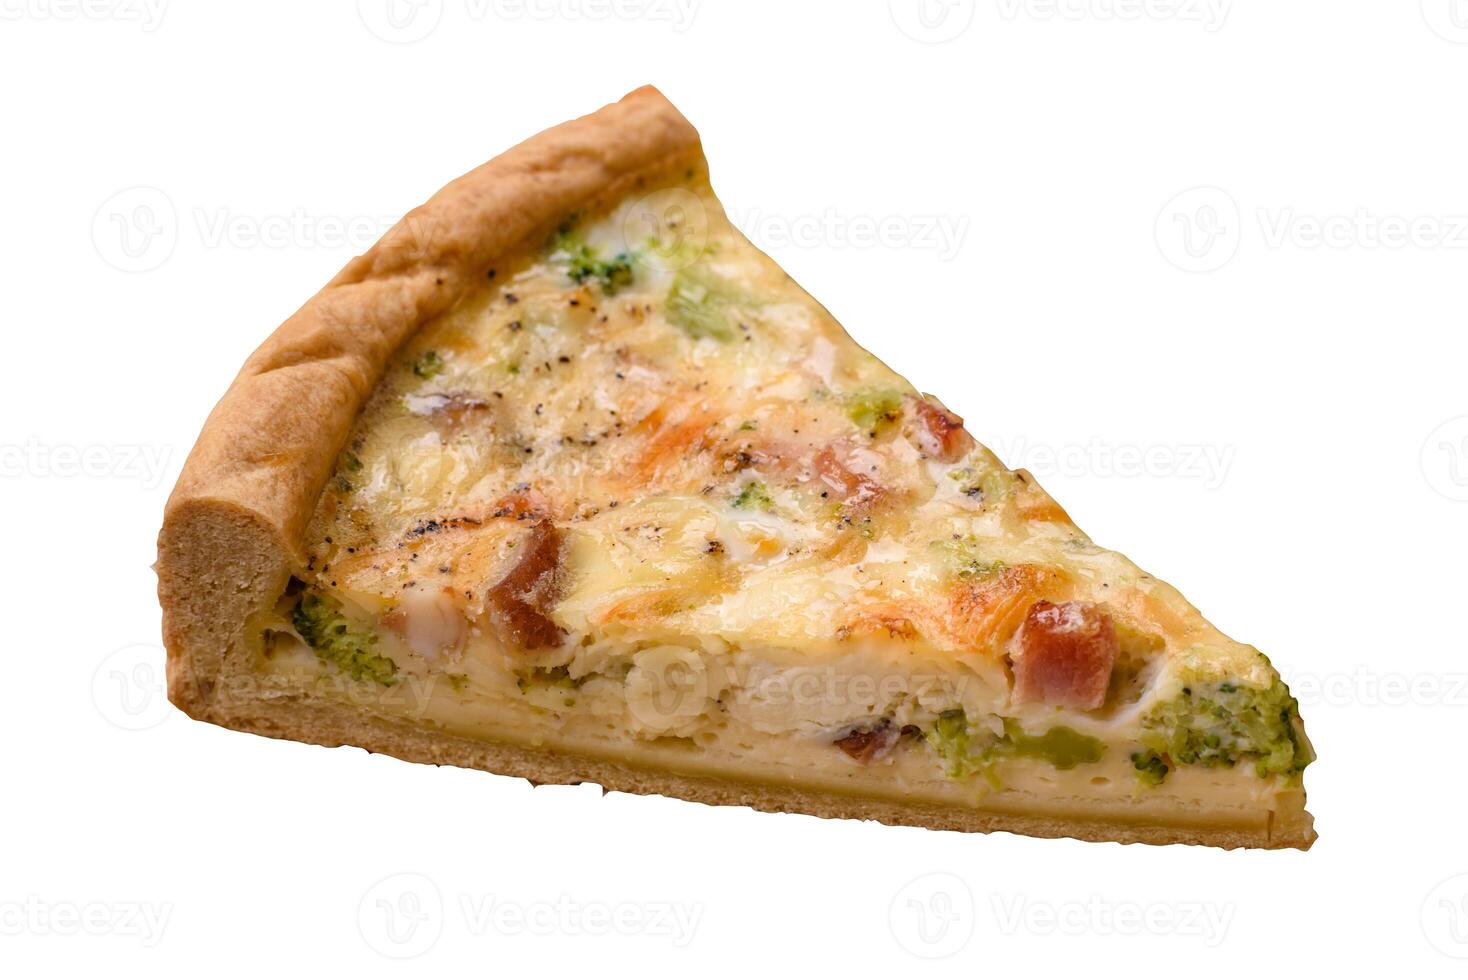 Delicious quiche with broccoli, cheese, chicken, spices and herbs photo